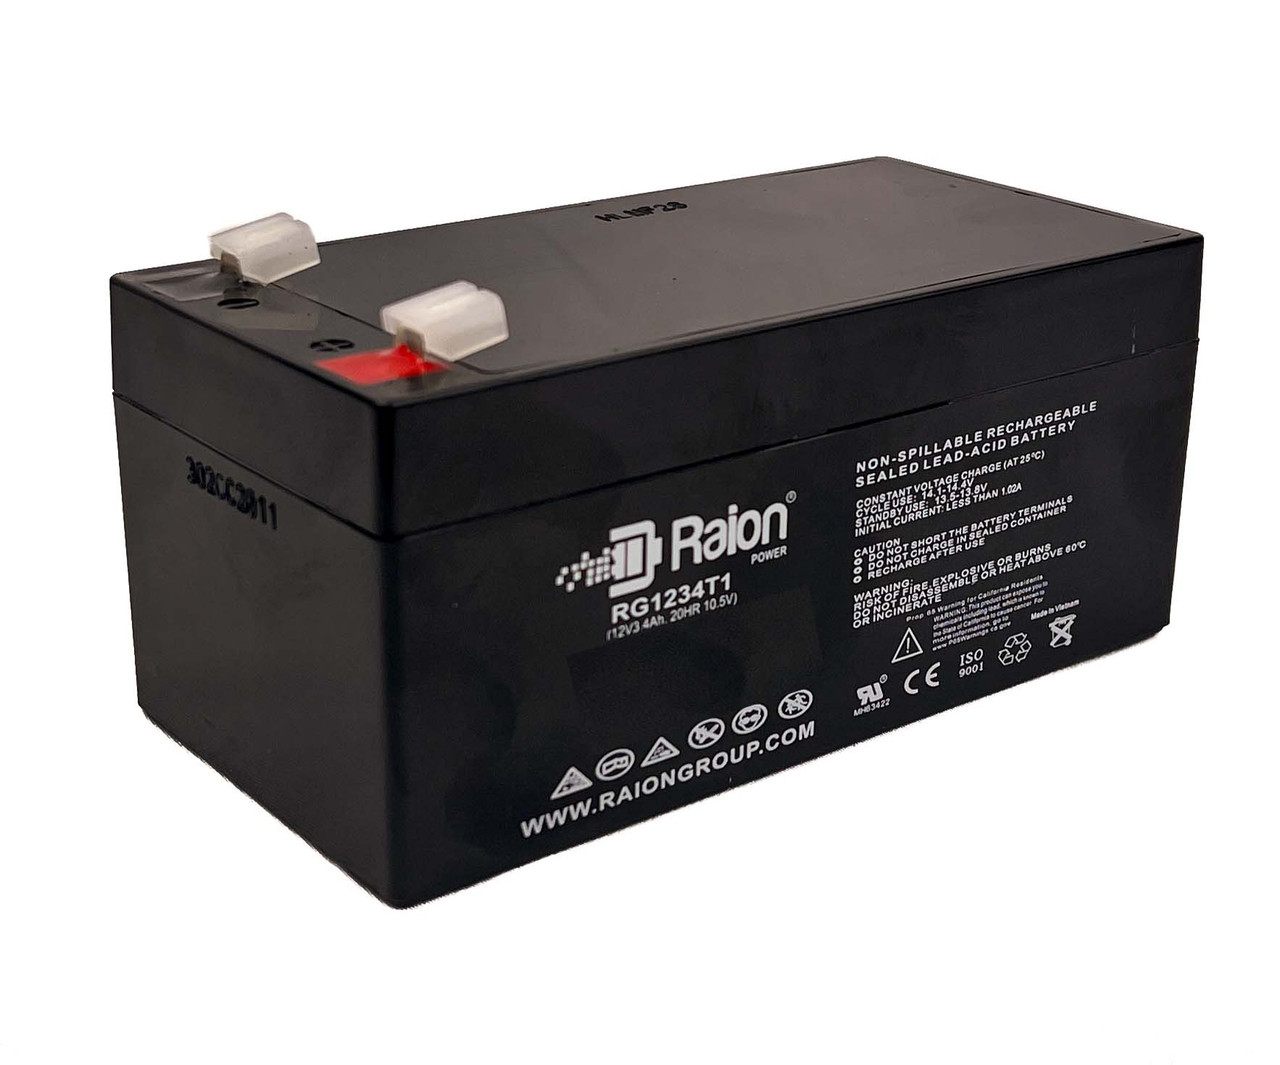 Raion Power 12V 3.4Ah Non-Spillable Replacement Battery for Ultramax NP3.3-12